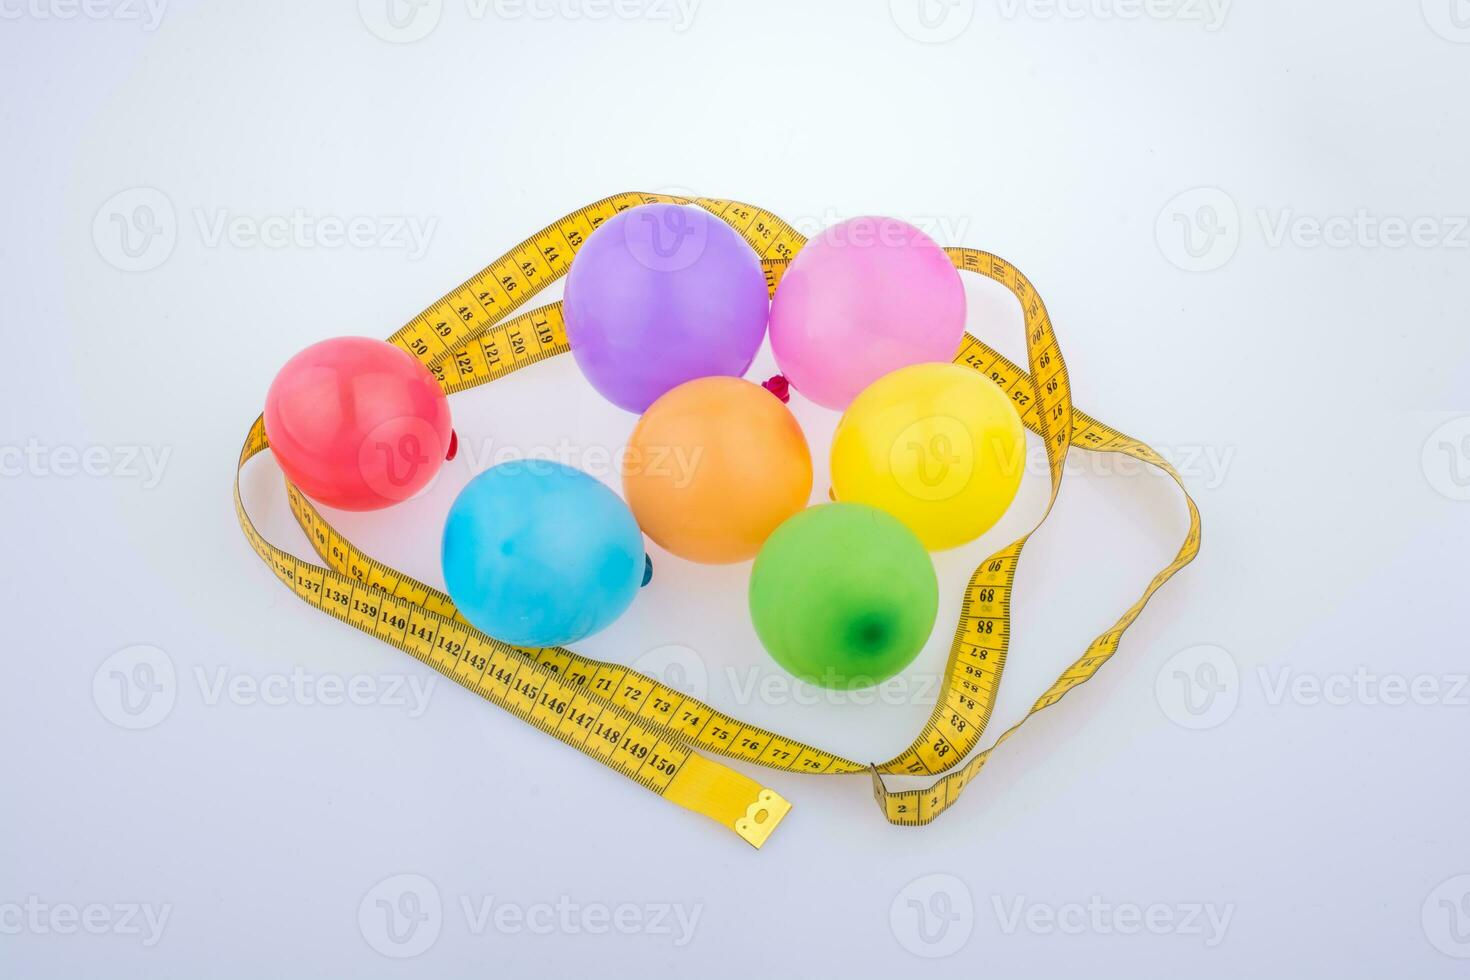 Colorful balloons surrounded by measuring tape with celebration party background photo